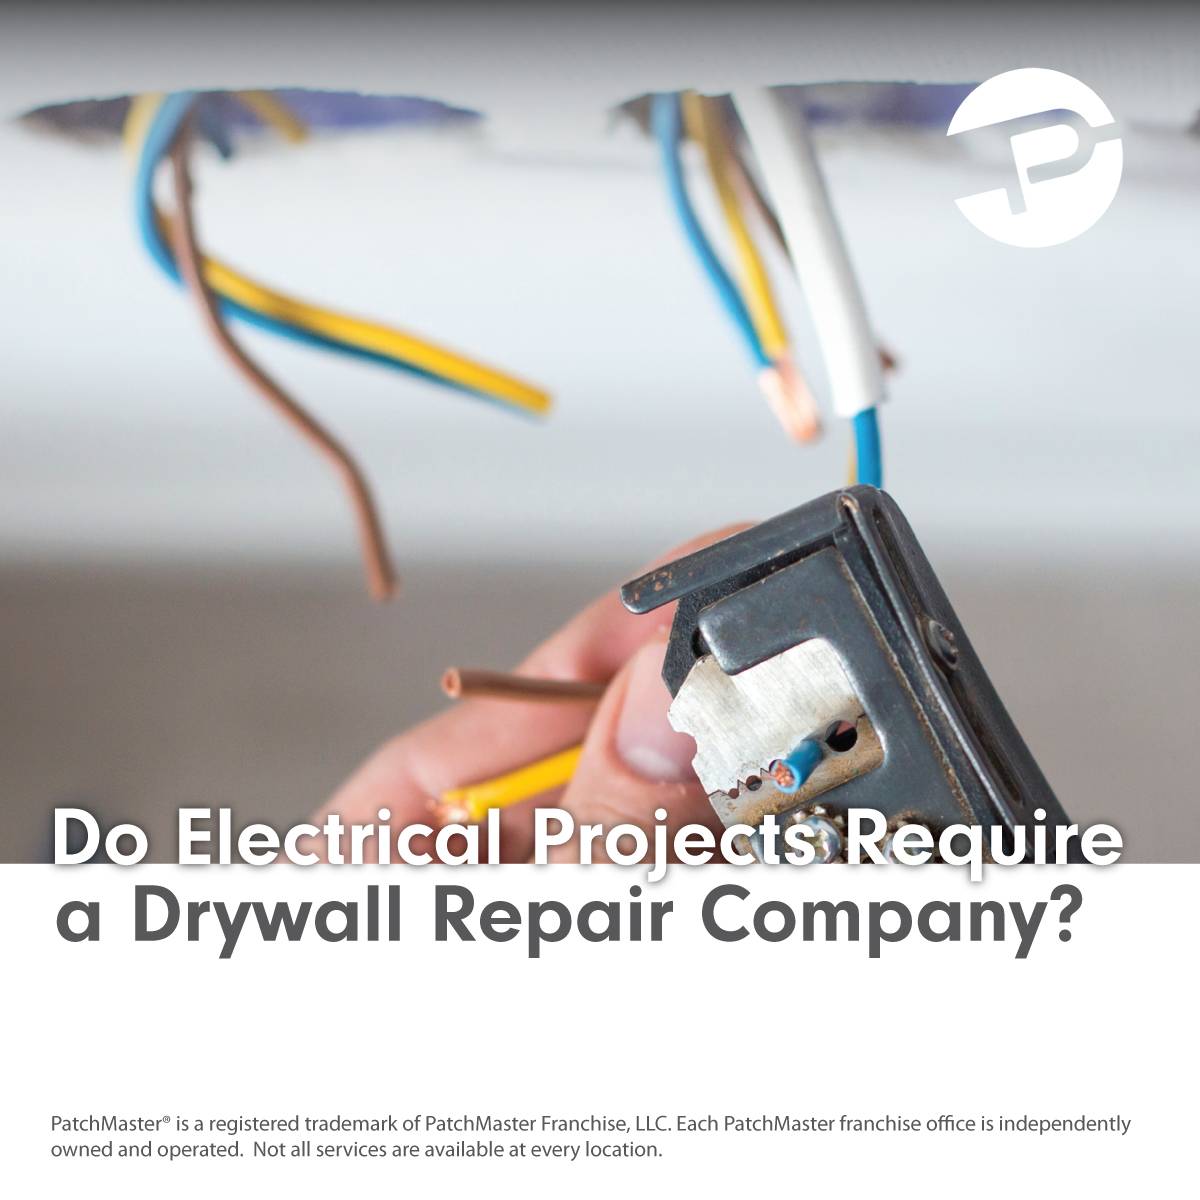 Do Electrical Projects Require a Drywall Repair Company?